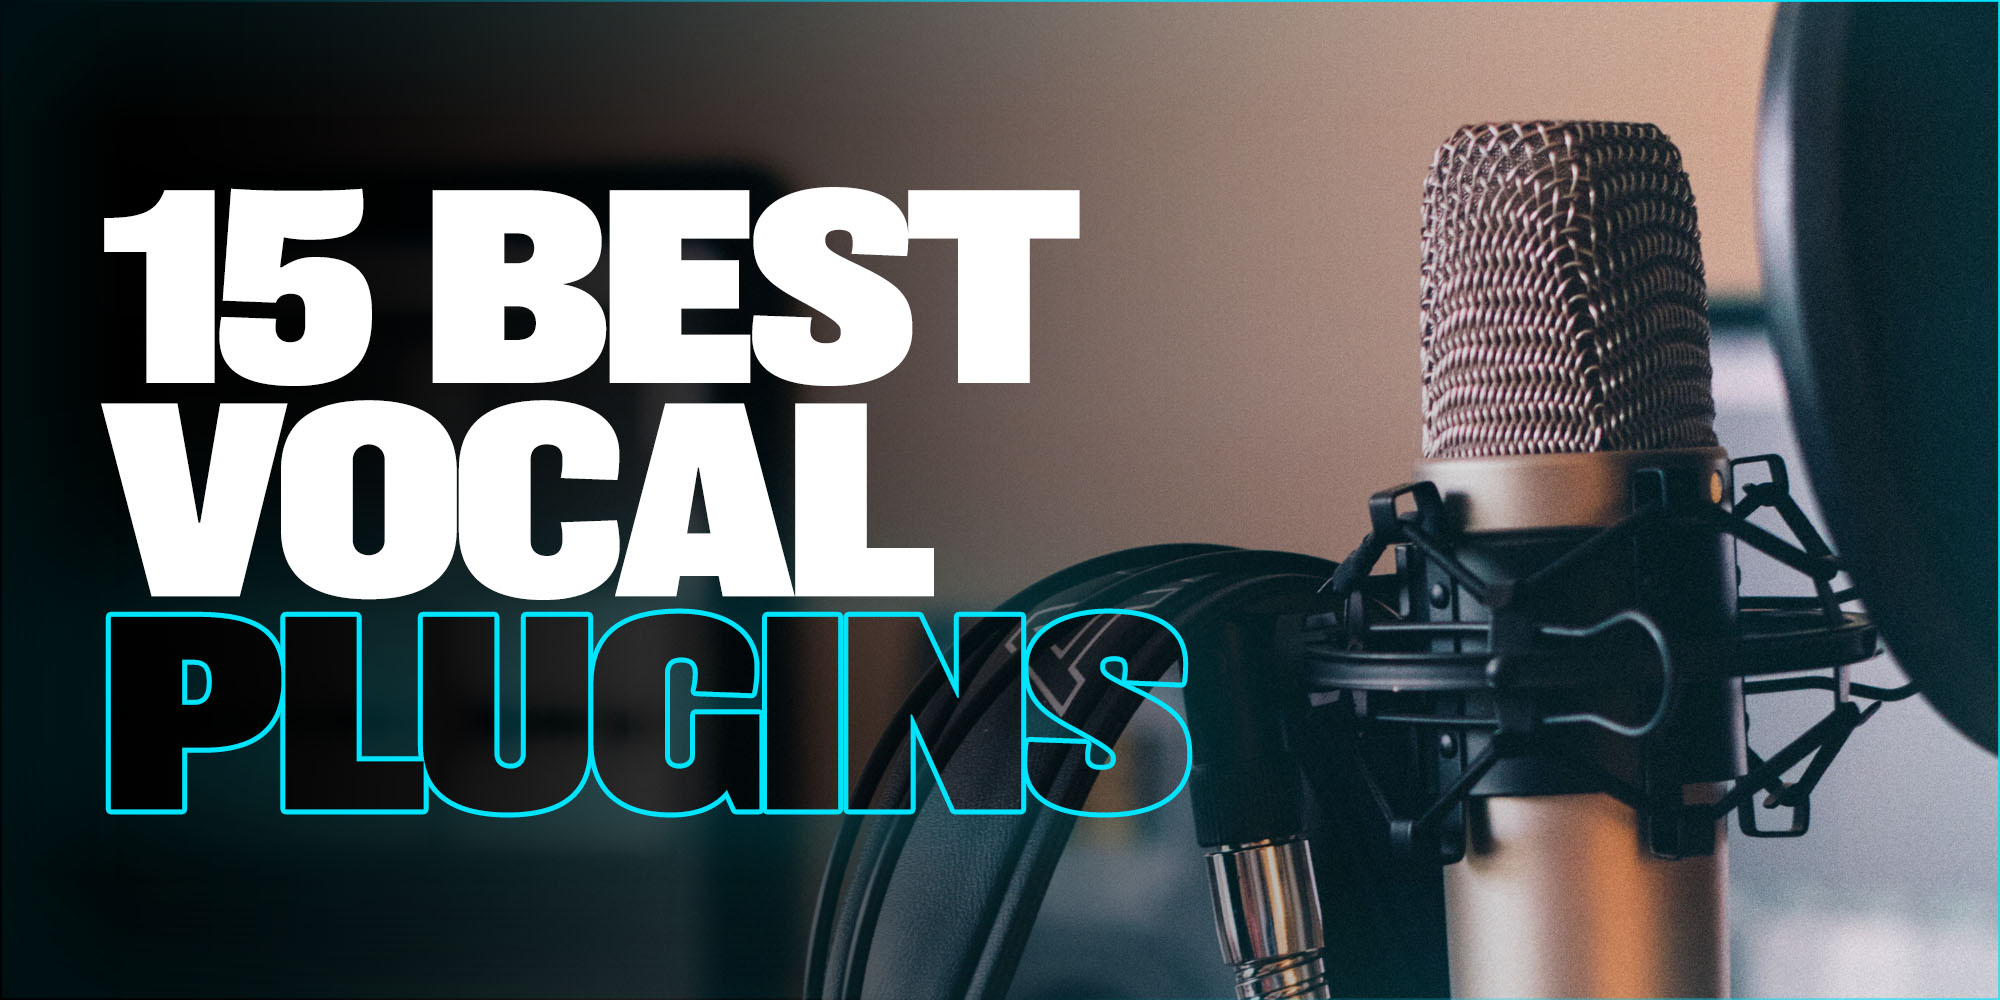 The 15 best vocal plugins you can download and use today